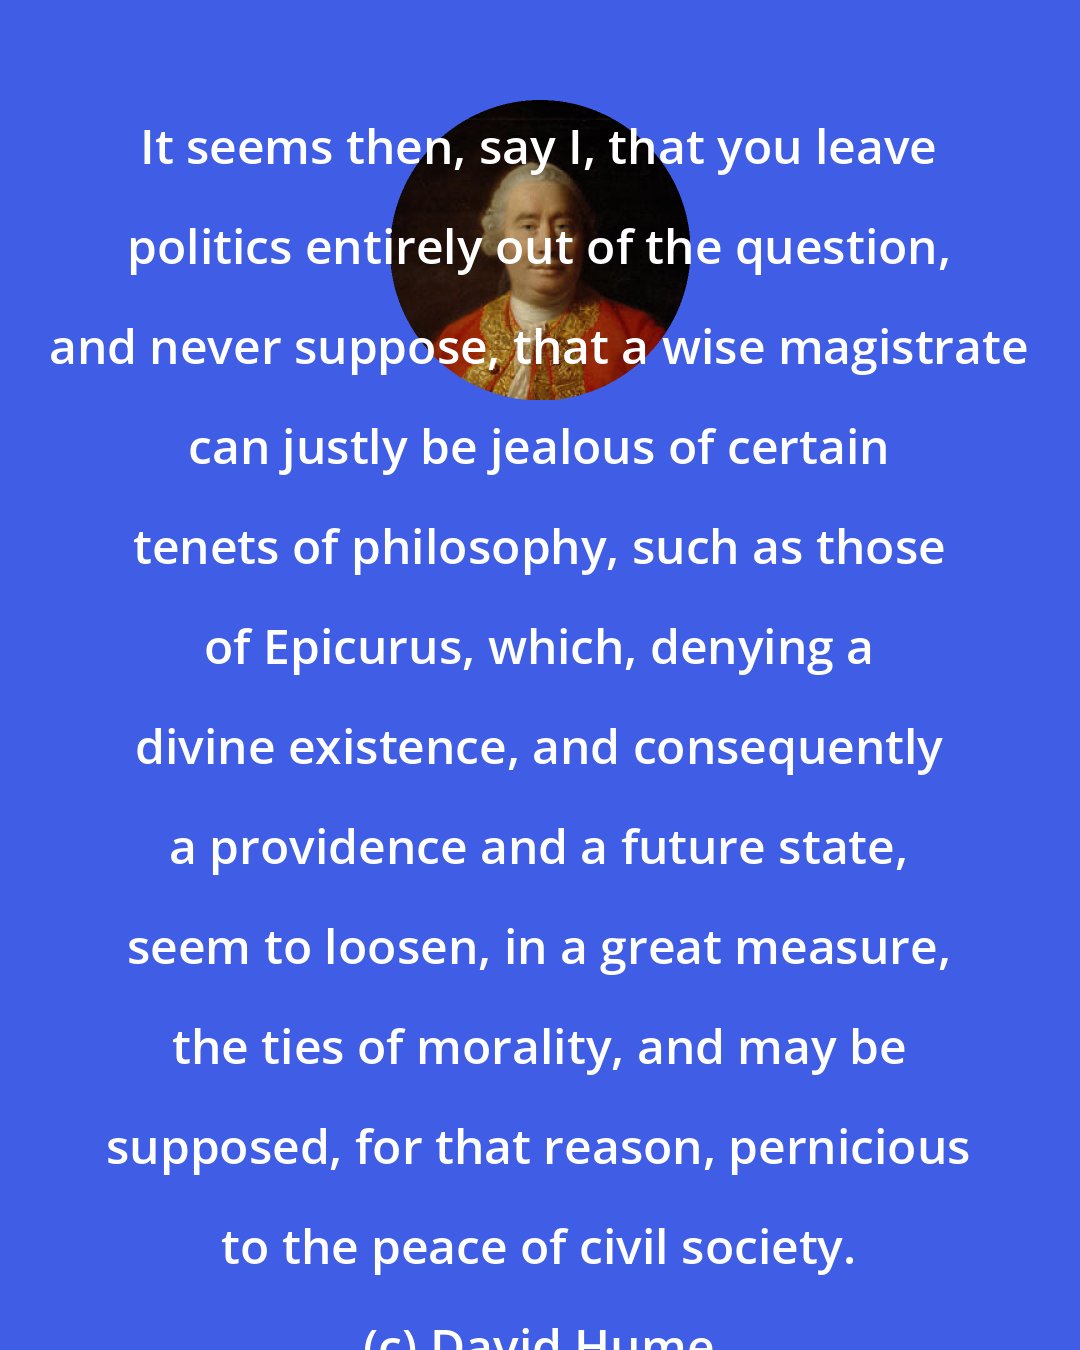 David Hume: It seems then, say I, that you leave politics entirely out of the question, and never suppose, that a wise magistrate can justly be jealous of certain tenets of philosophy, such as those of Epicurus, which, denying a divine existence, and consequently a providence and a future state, seem to loosen, in a great measure, the ties of morality, and may be supposed, for that reason, pernicious to the peace of civil society.